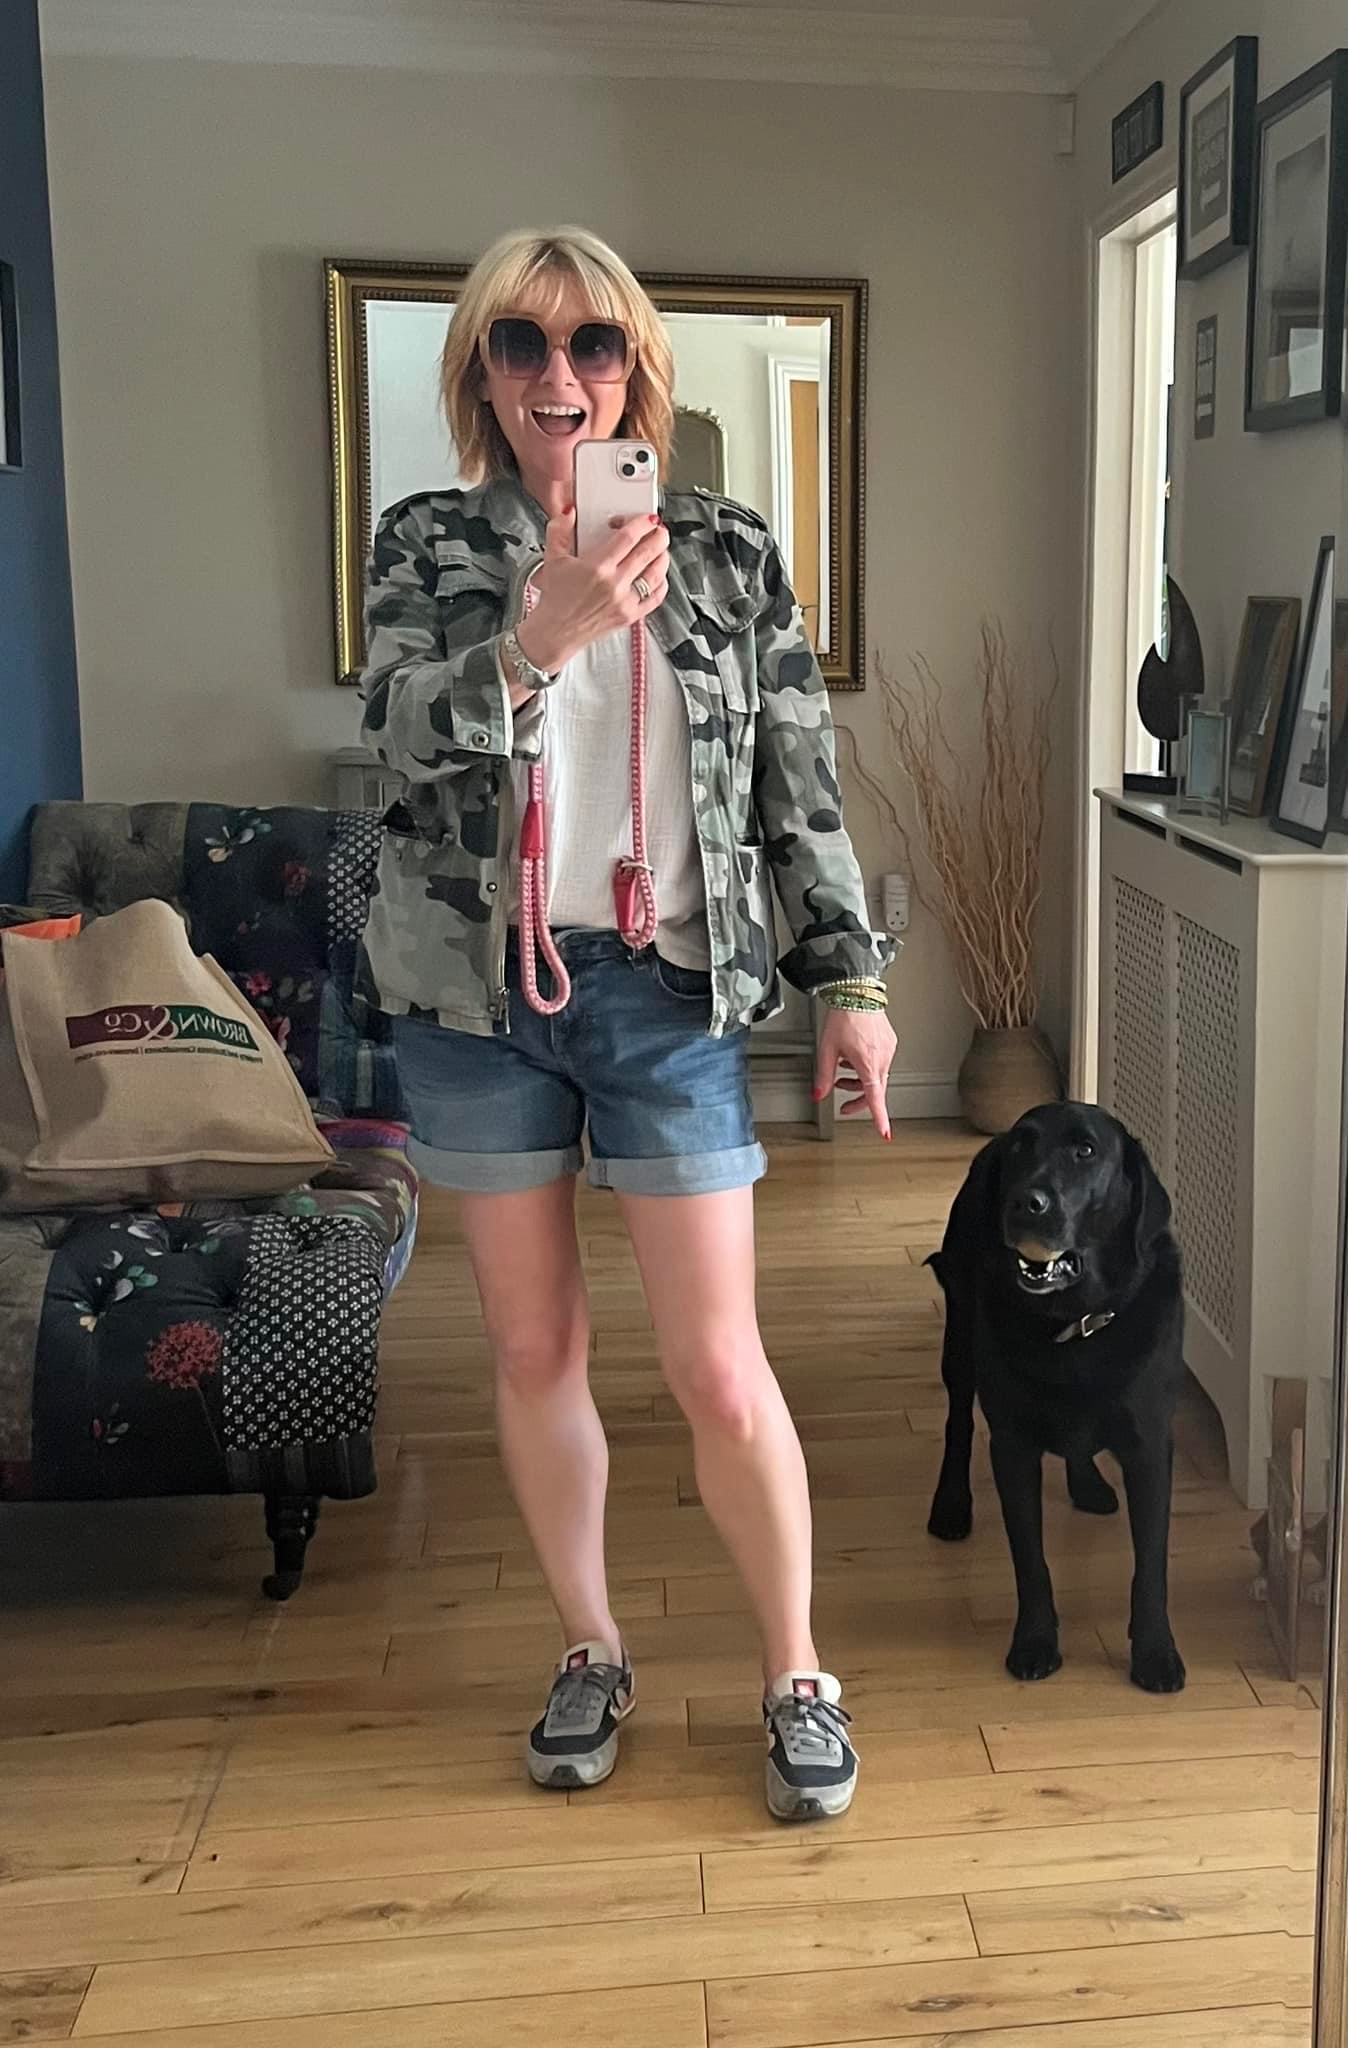 Mrs Stylewright wearing denim shorts ready to take the dog for a walk